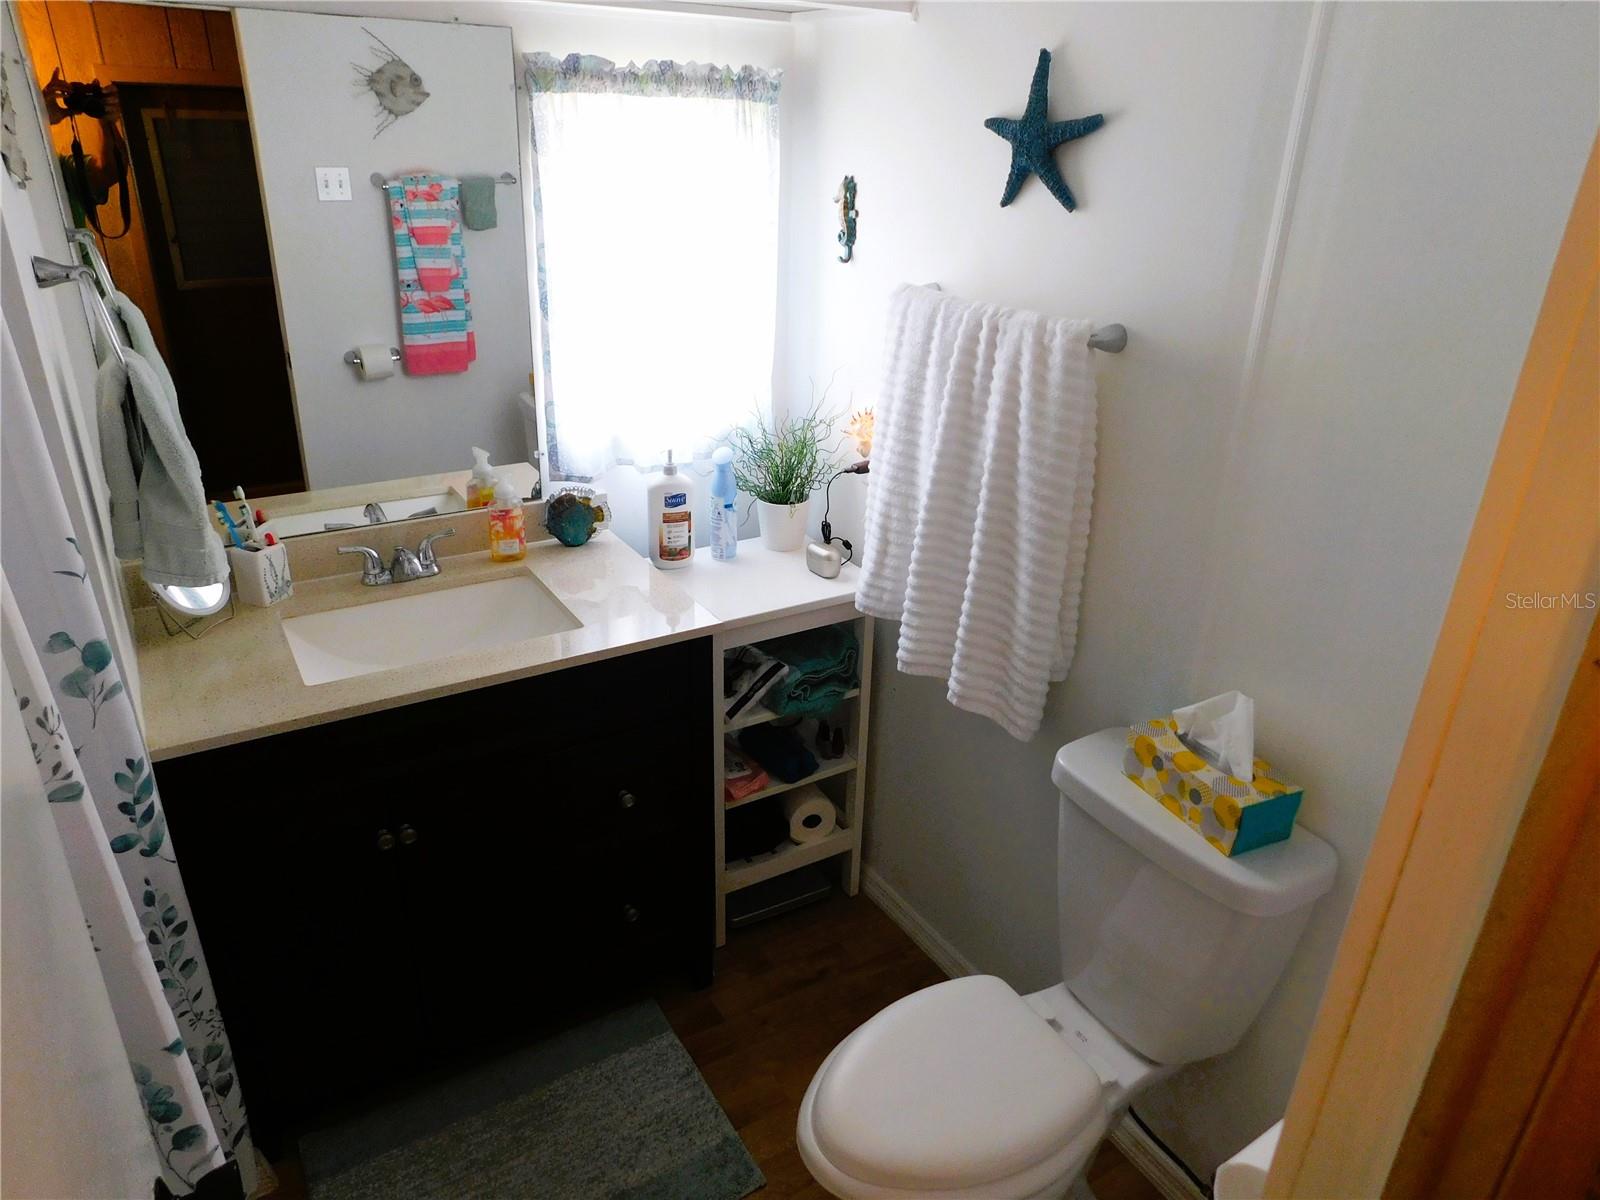 Bathroom has many updates including a step-in shower.